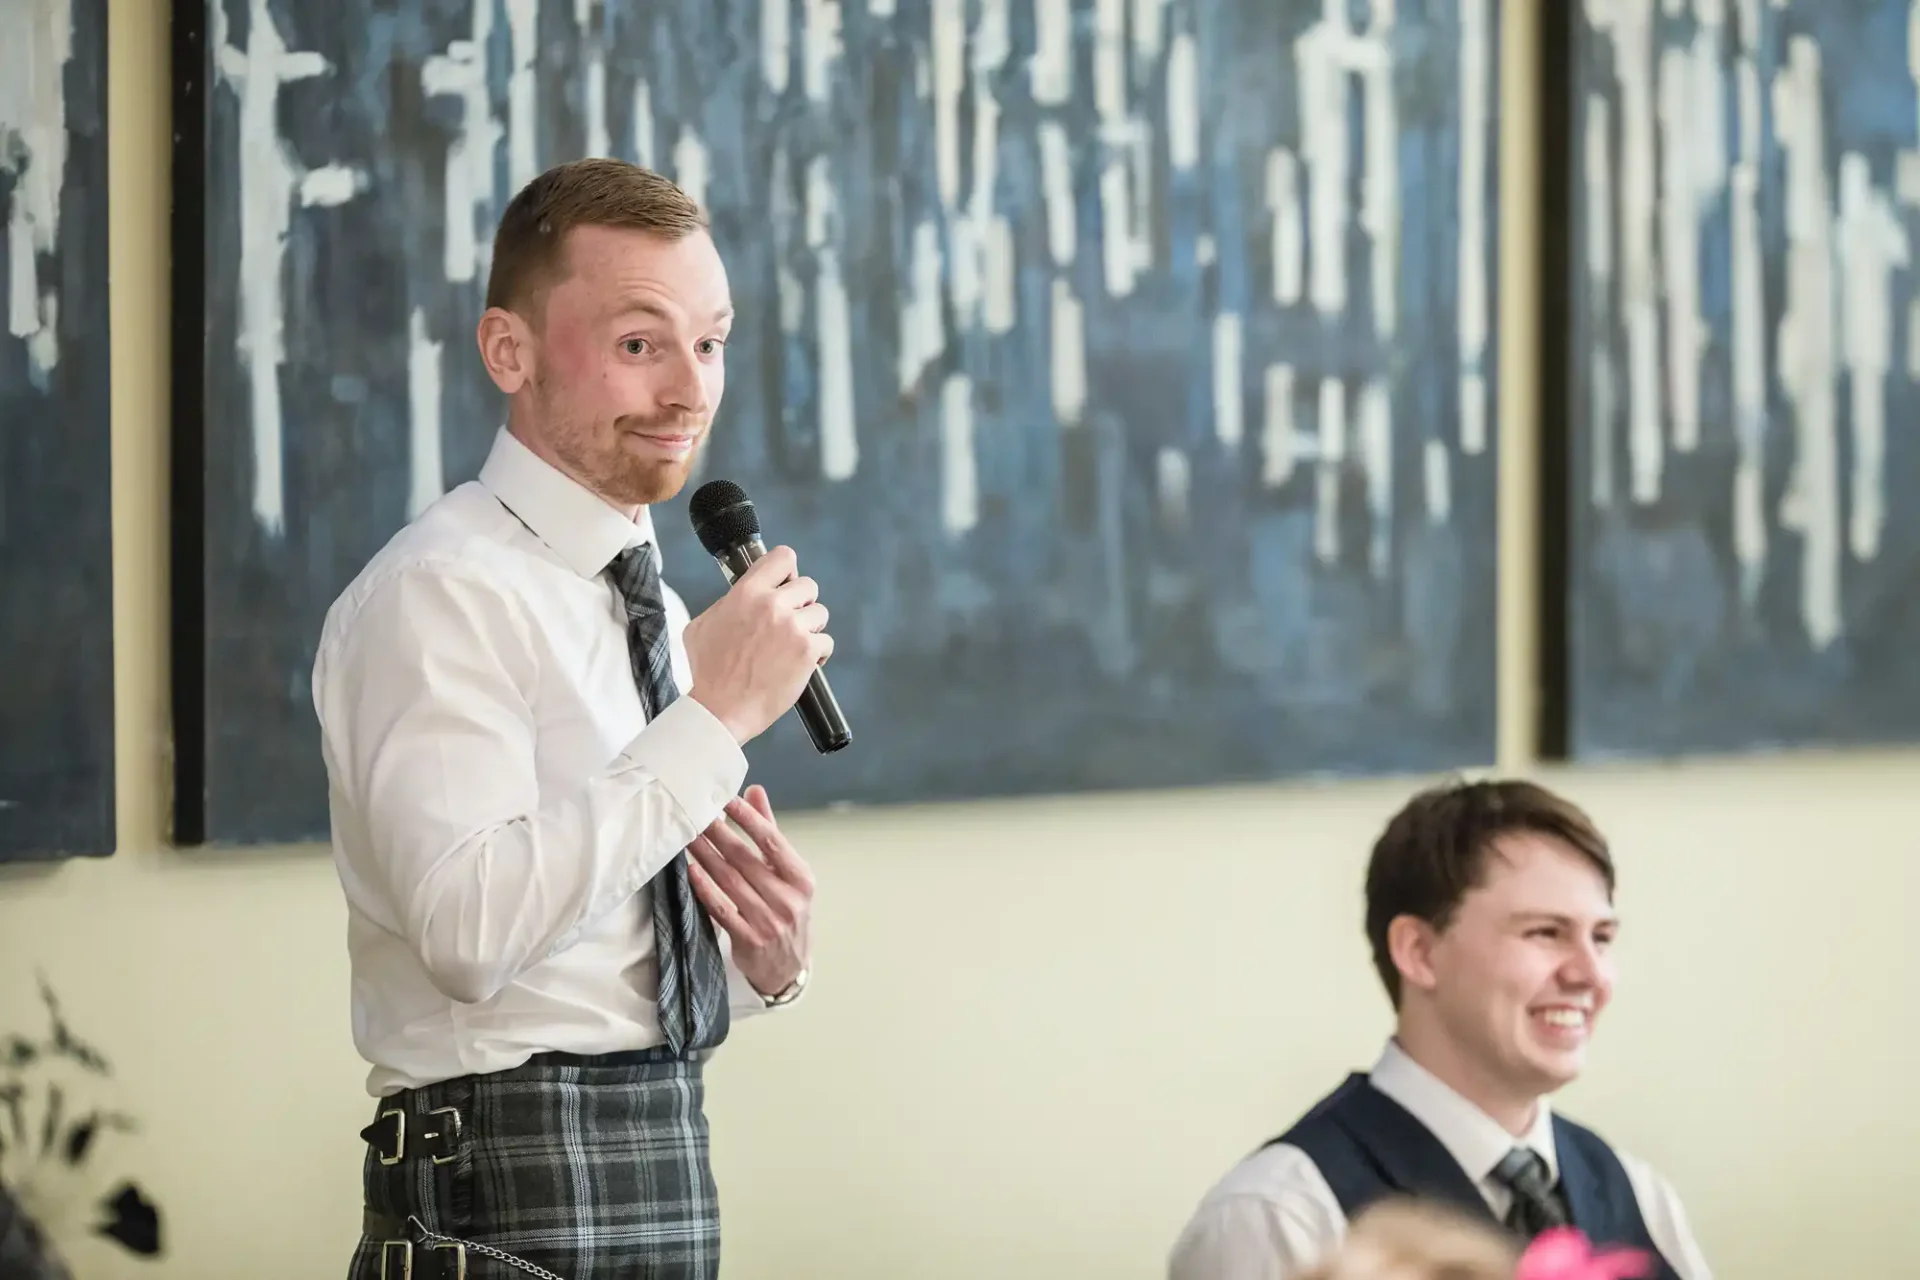 A man in a vest and kilt speaks into a microphone at an event, with a seated man smiling in the background.